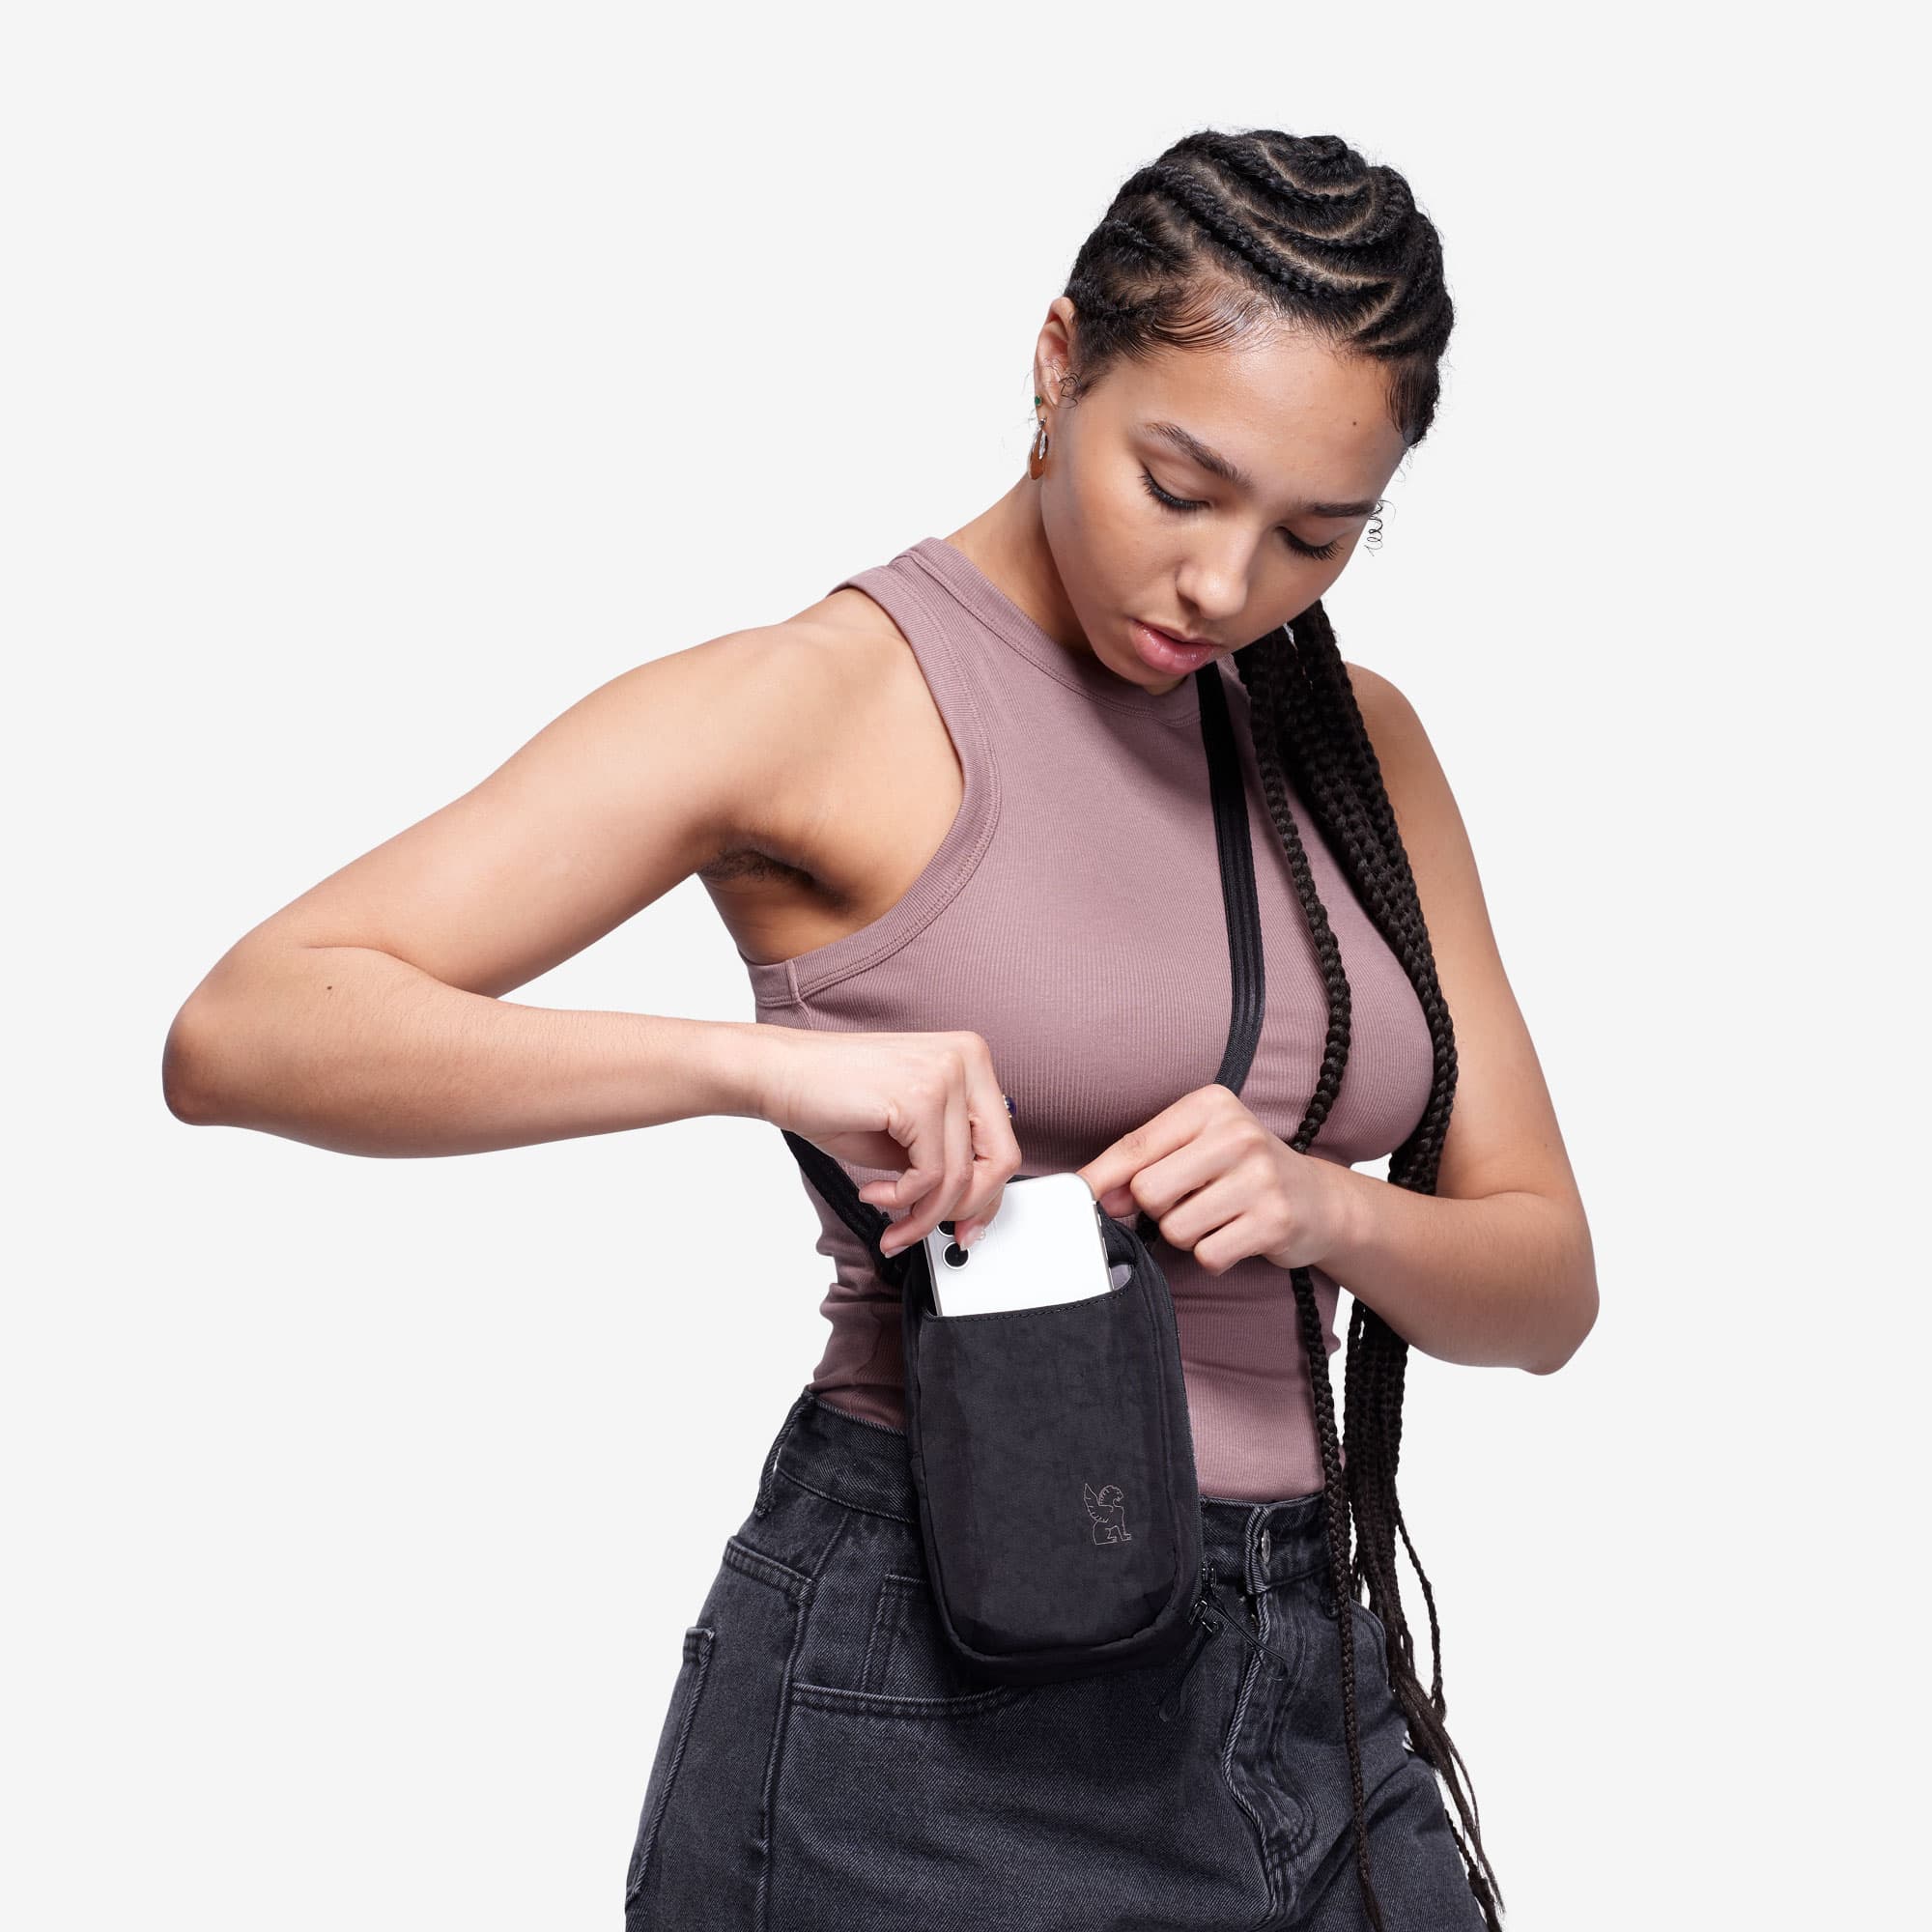 Logan pouch worn by a woman adding her phone